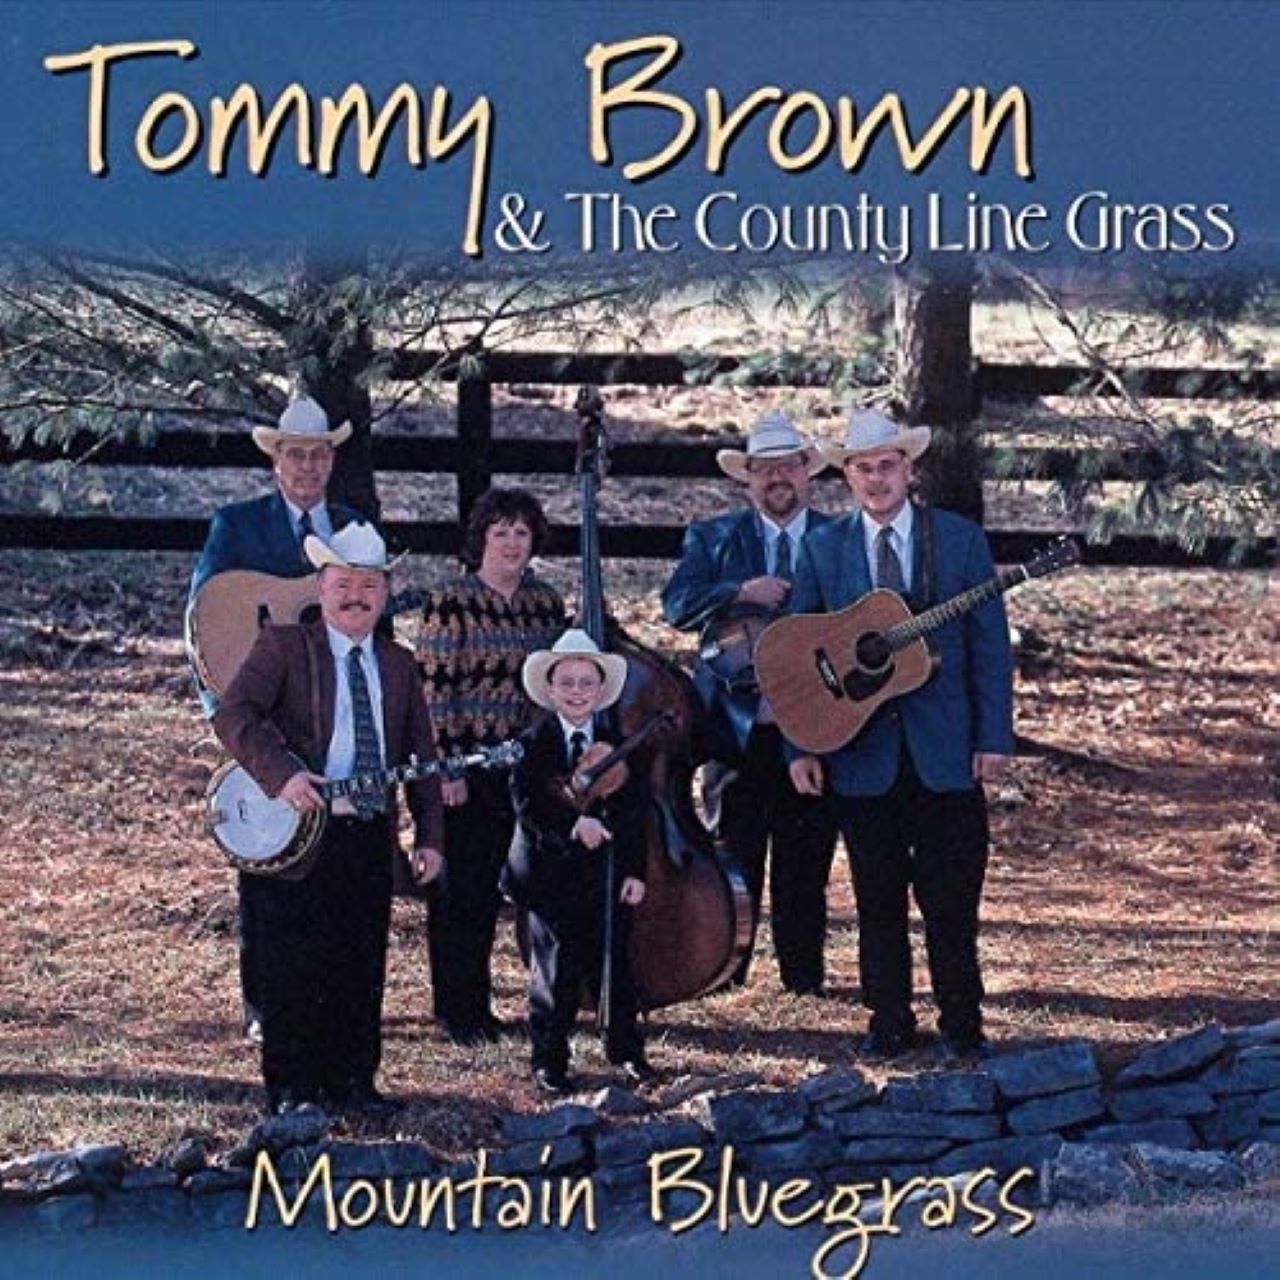 Tommy Brown & The County Line Grass - Mountain Bluegrass cover album